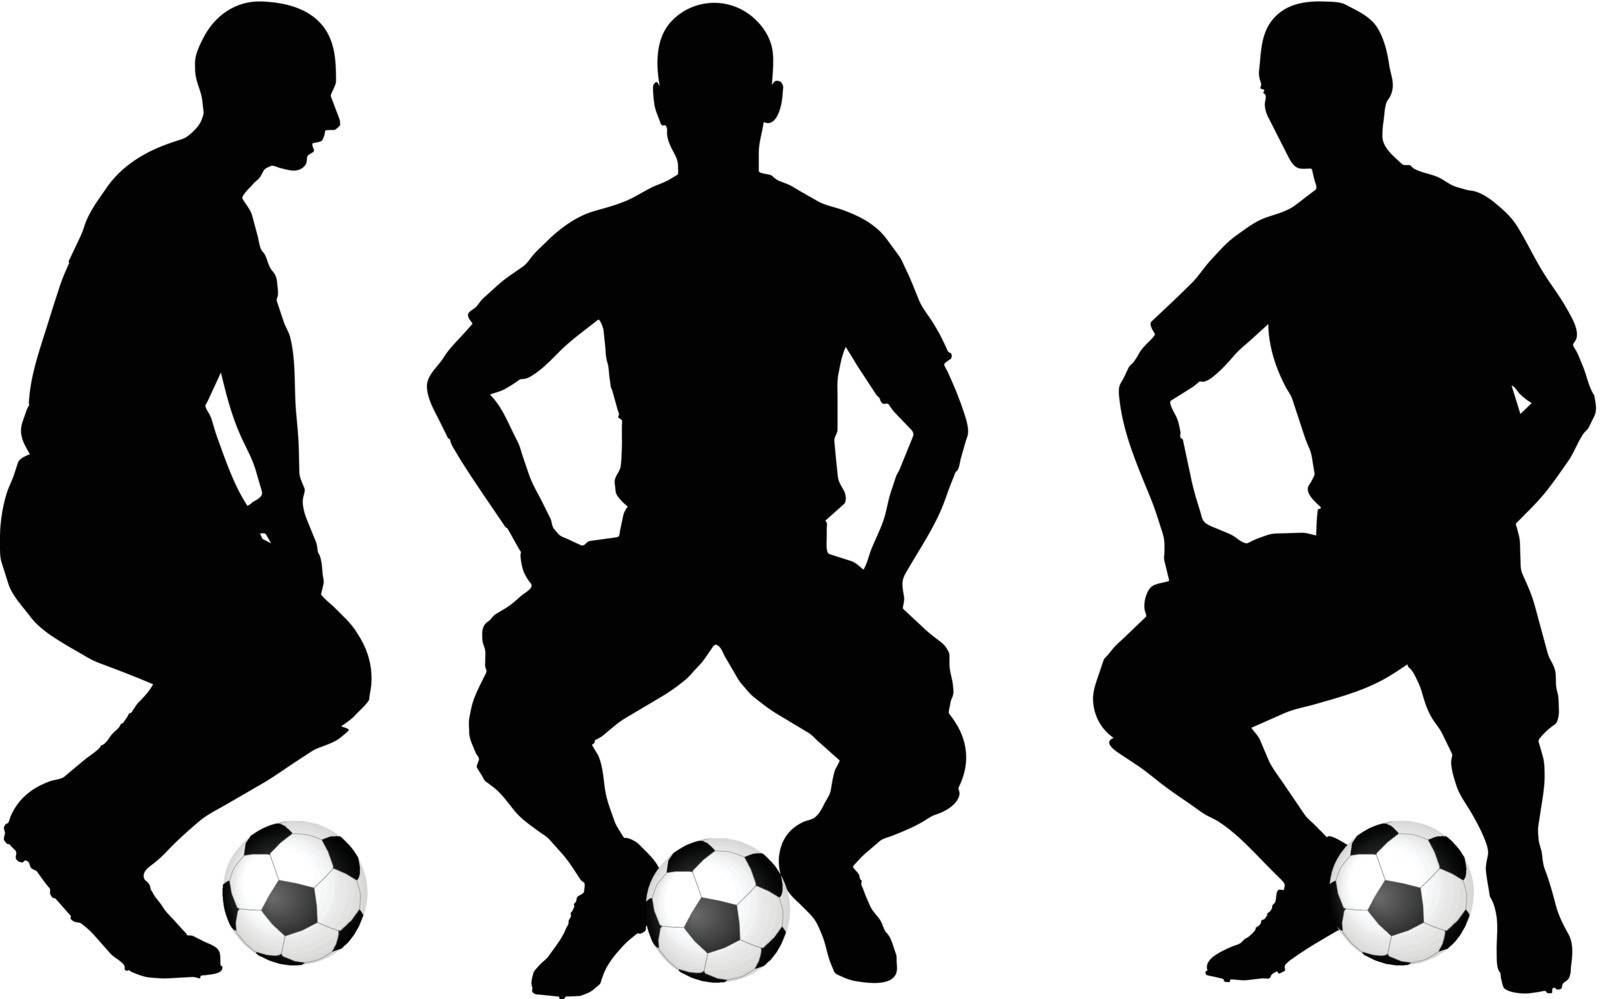 poses of soccer players silhouettes in sitting position by Istanbul2009